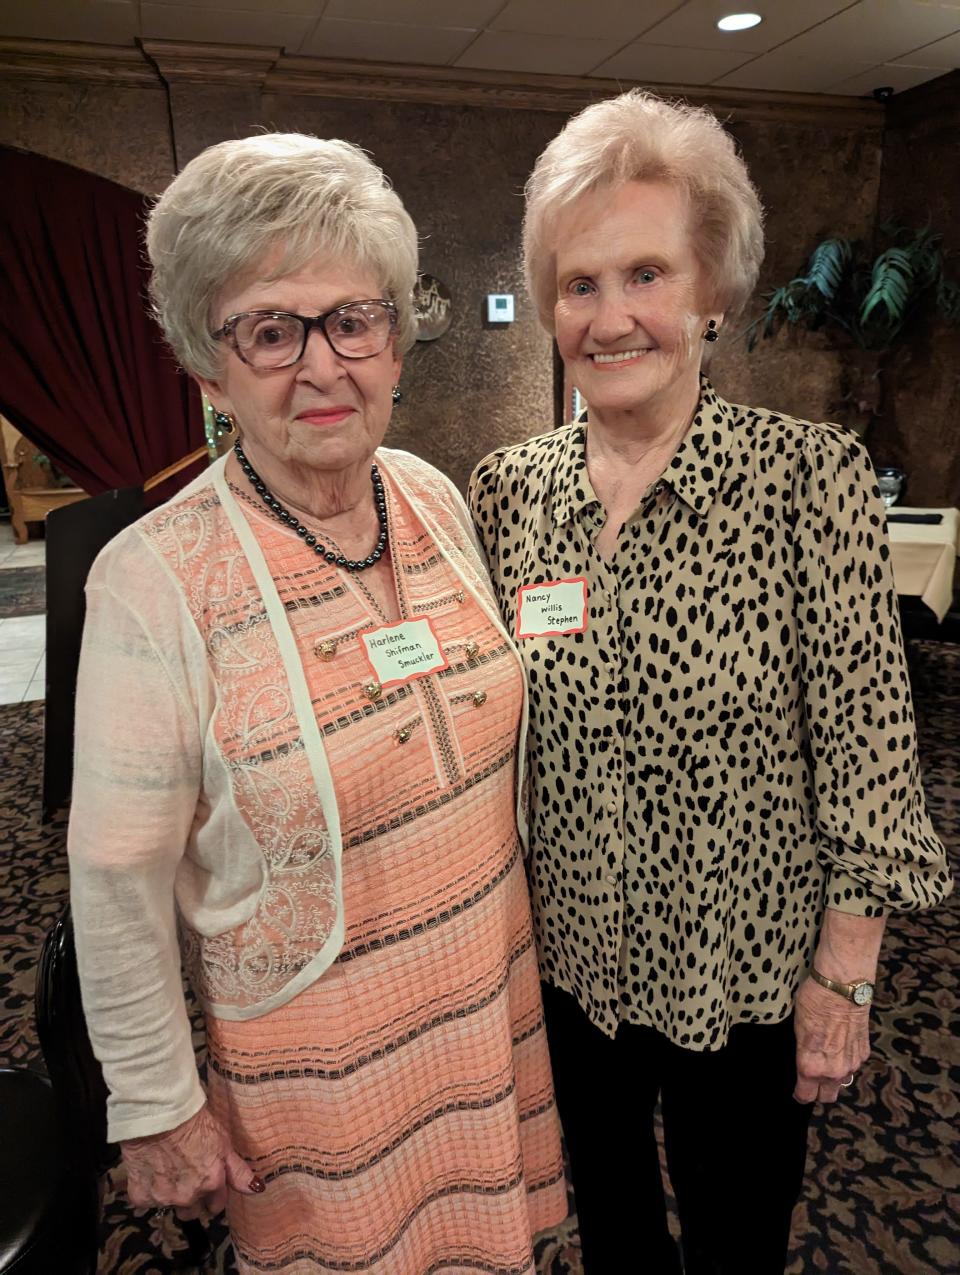 McKinley High School Class of 1950 members Harlene Shifman Smuckler, left, and Nancy Willis Stephen recently gathered with other classmates for a reunion in Canton.